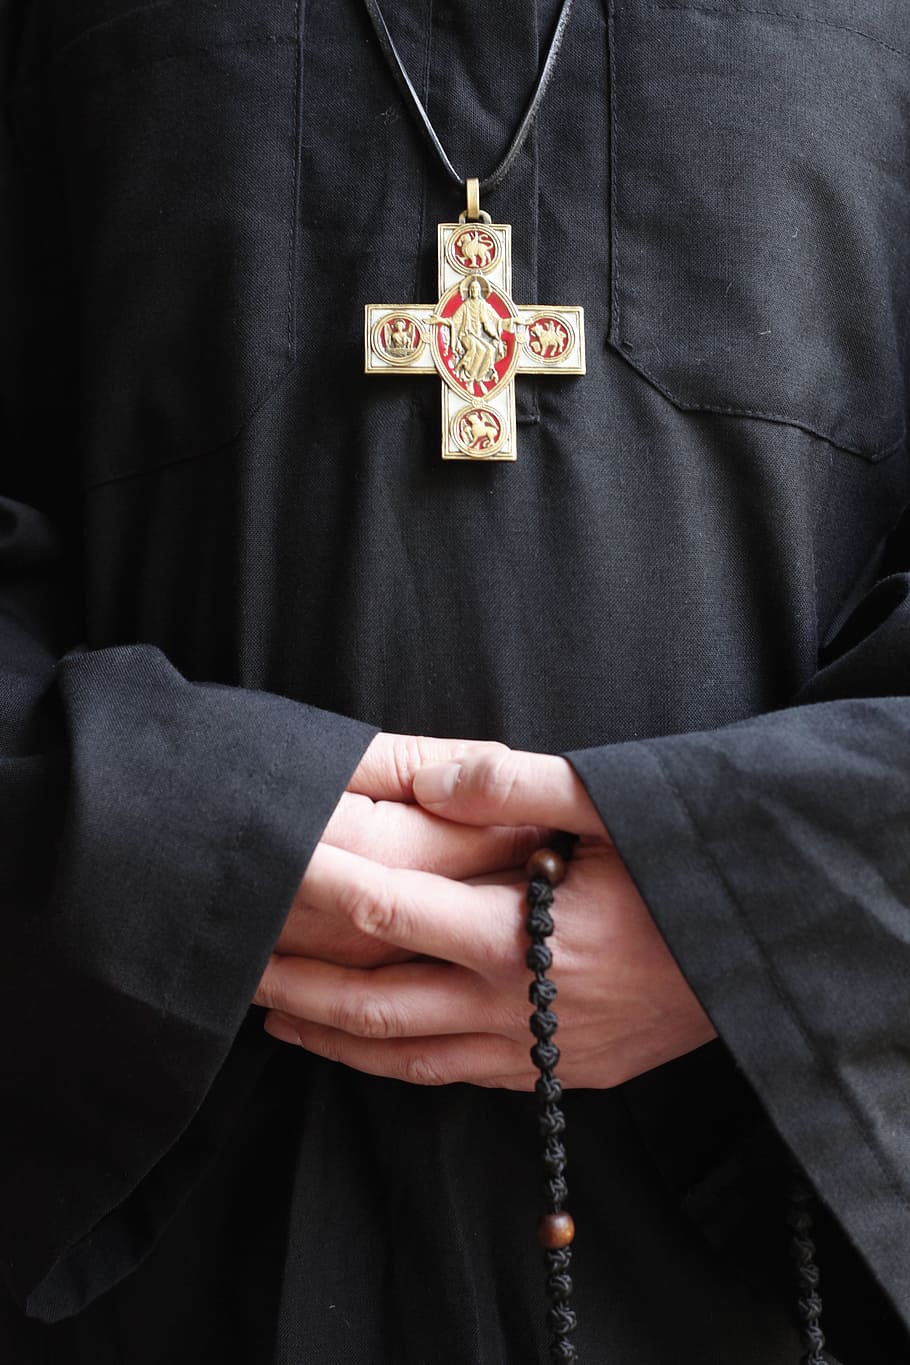 person, holding, black, brown, rosary, monk, church, christianity, cross, beads